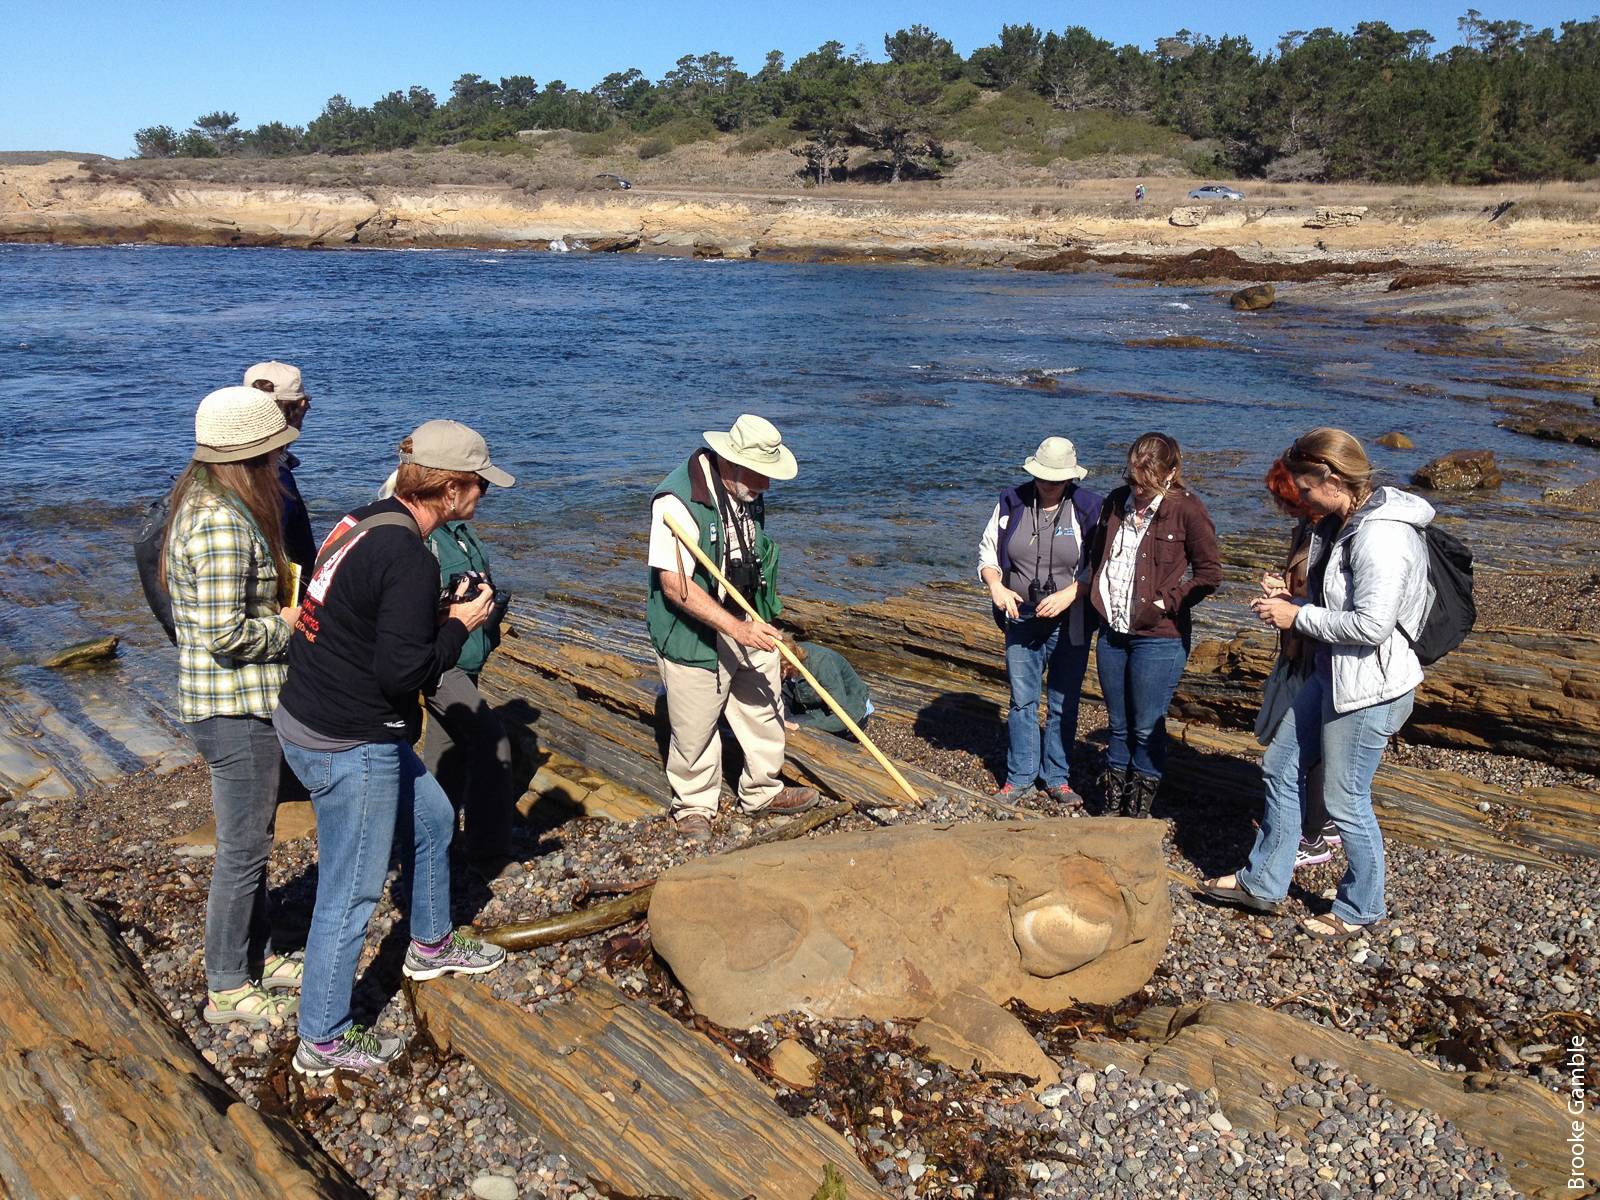 The California Naturalist program encourages participants to engage in research, environmental monitoring and restoration work. Here, California Naturalists explore trace fossils with geologist Ed Clifton at Point Lobos State Natural Reserve in Monterey County.